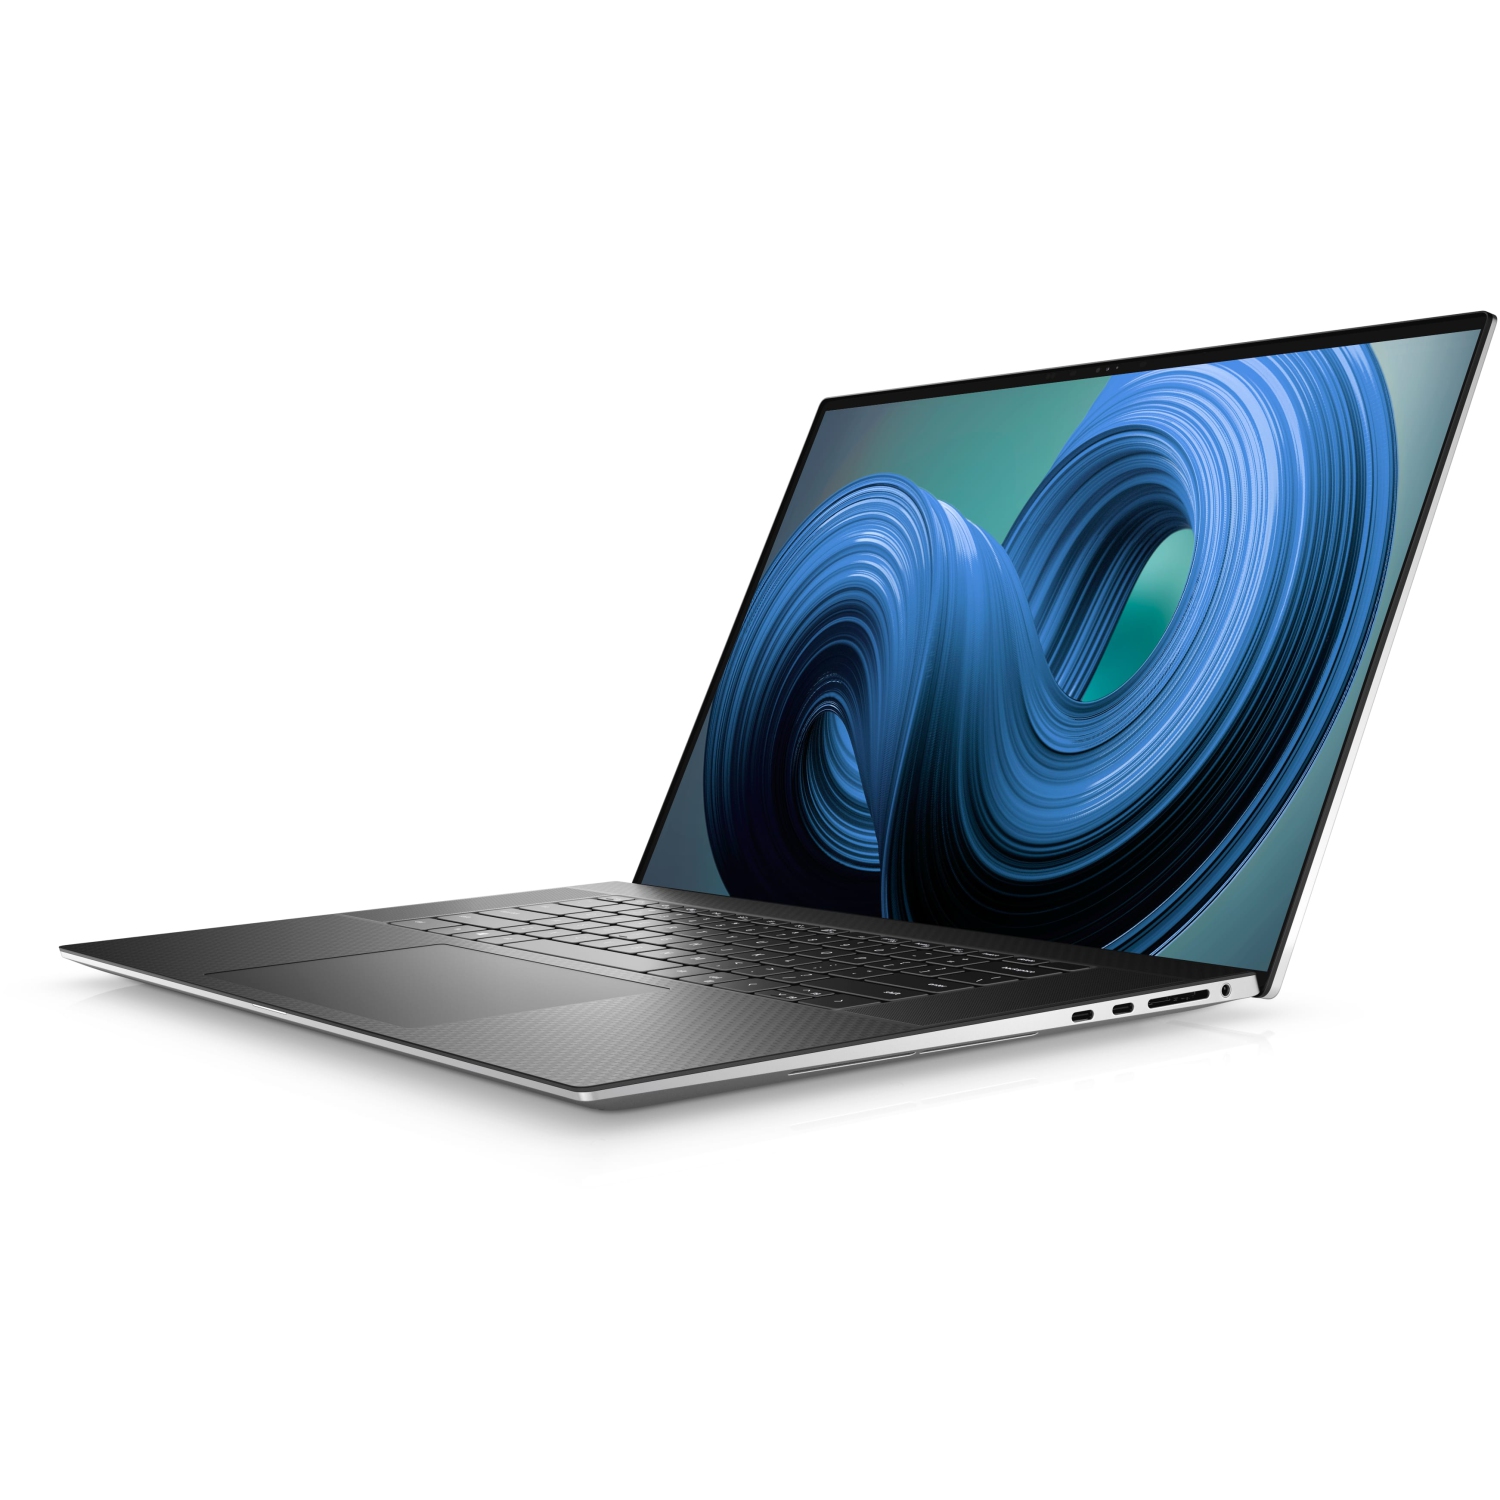 Refurbished (Excellent) – Dell XPS 9720 Laptop (2022) | 17" FHD+ | Core i7 - 1TB SSD - 64GB RAM - RTX 3050 | 14 Cores @ 4.7 GHz - 12th Gen CPU